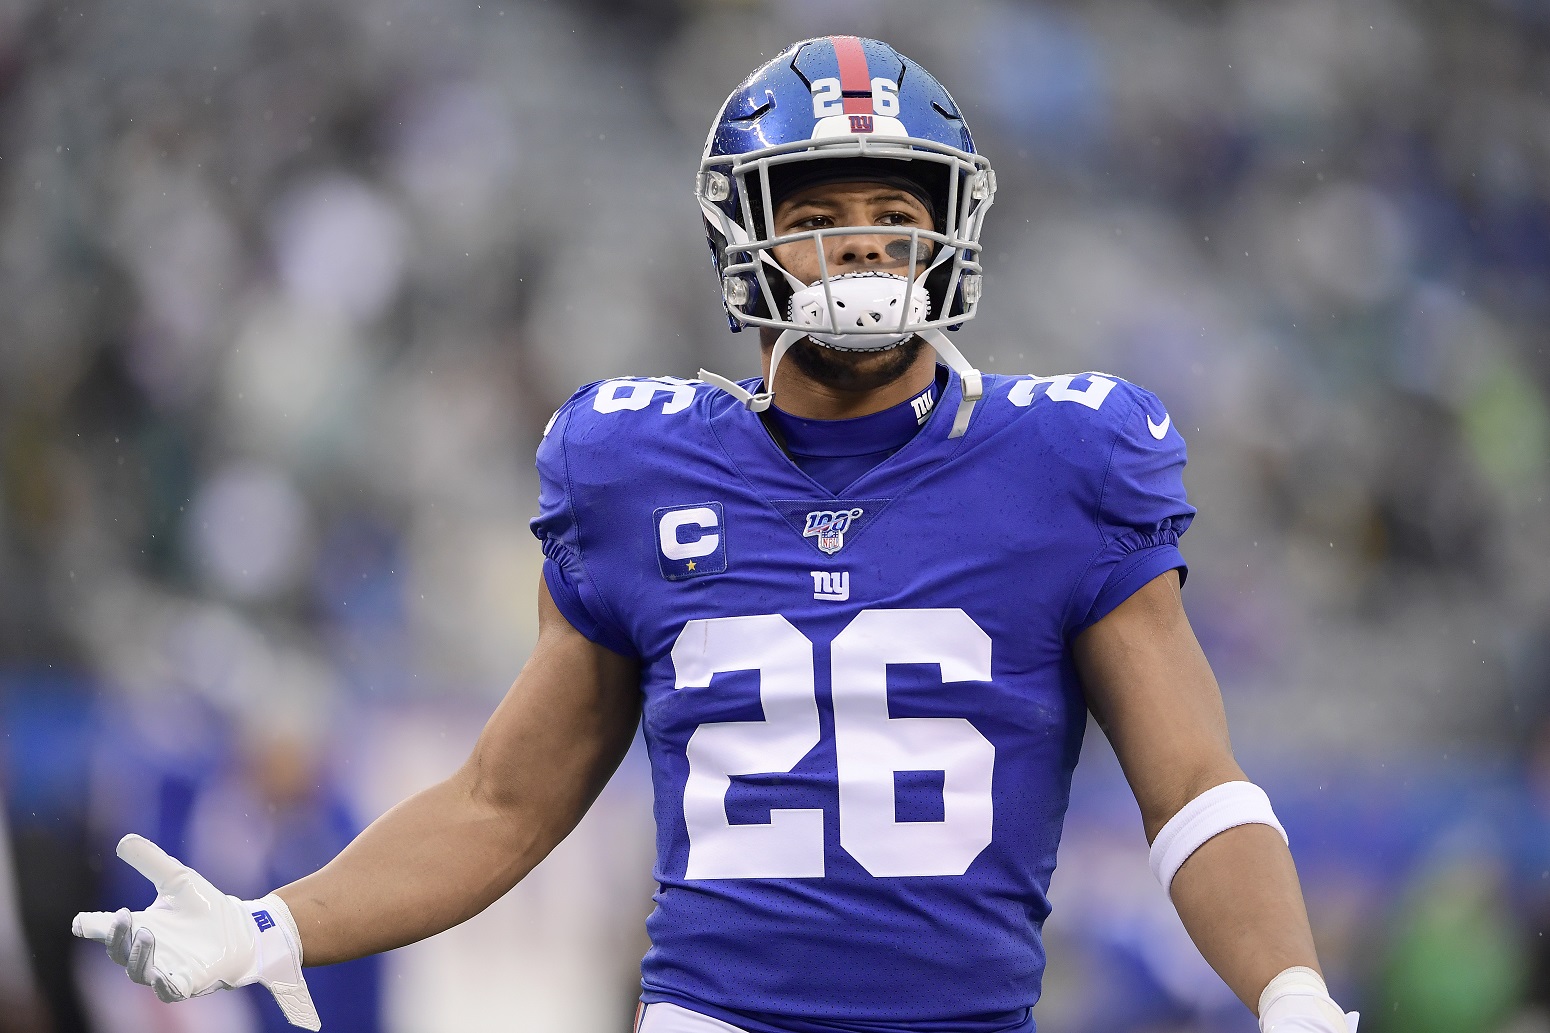 Saquon Barkley Just Sent a Stern Message to Giants Legend